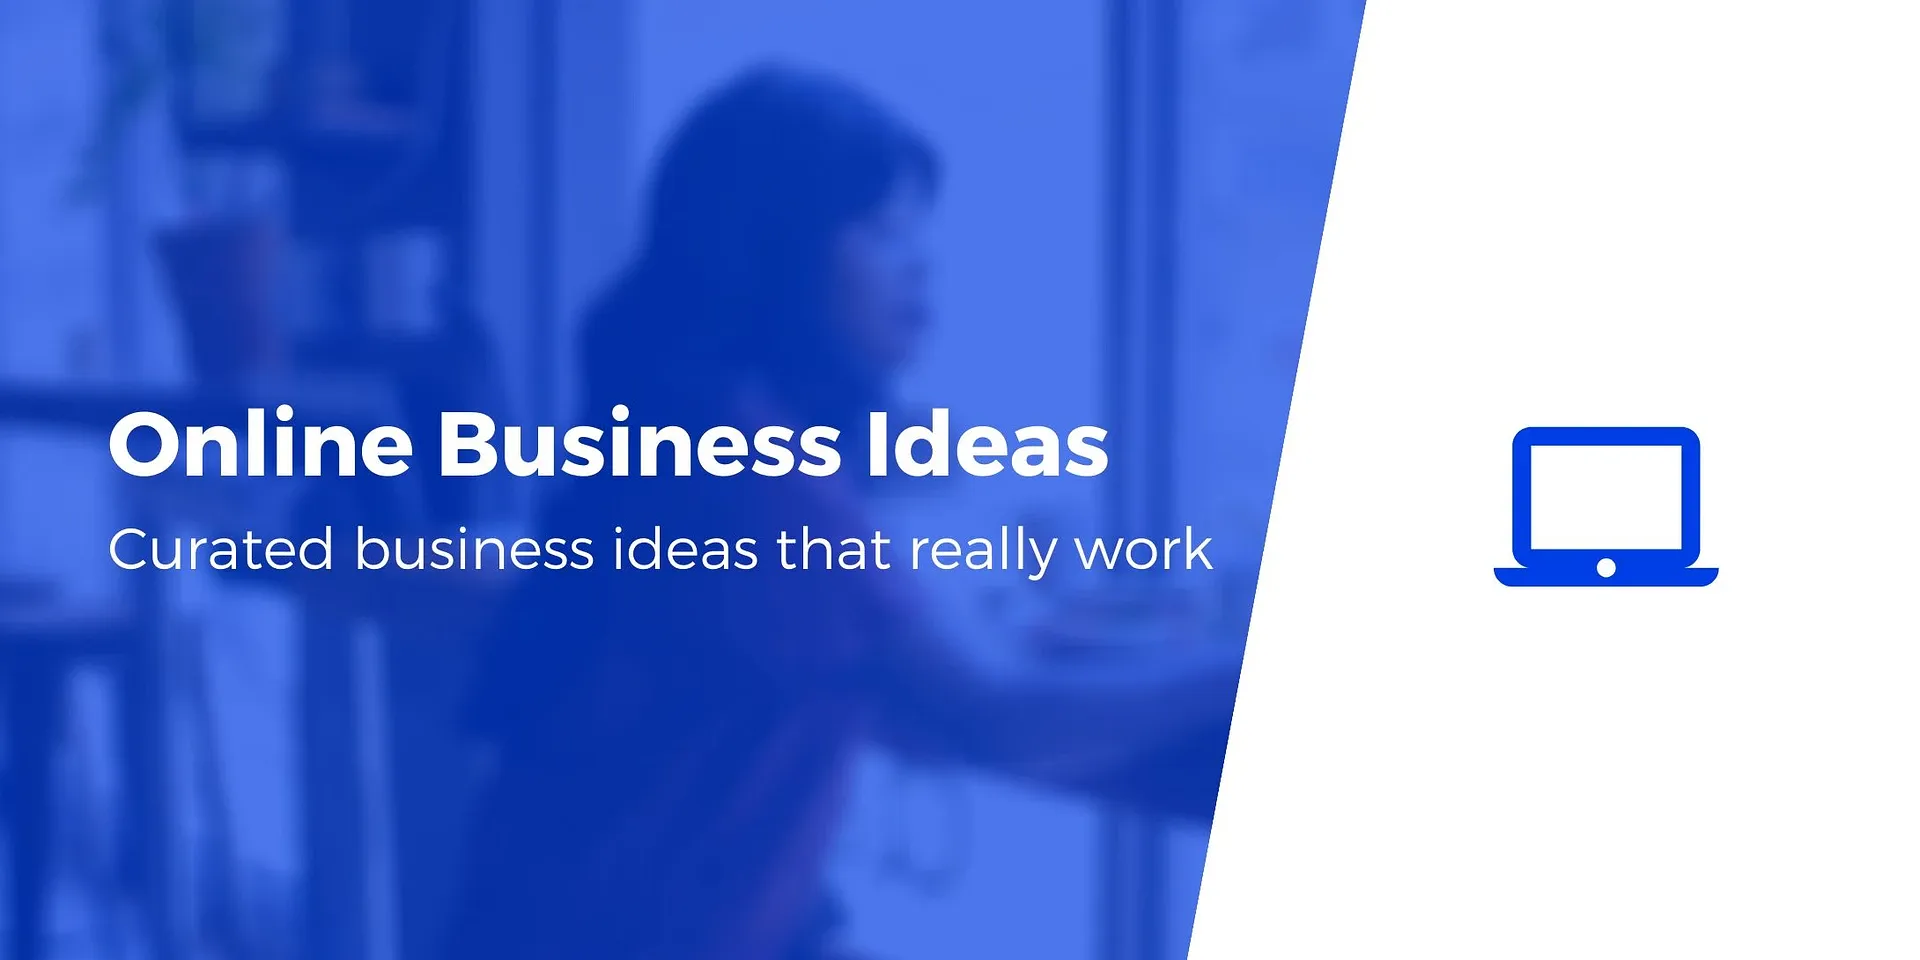  Online Business Ideas that Can Make a Lot of Money